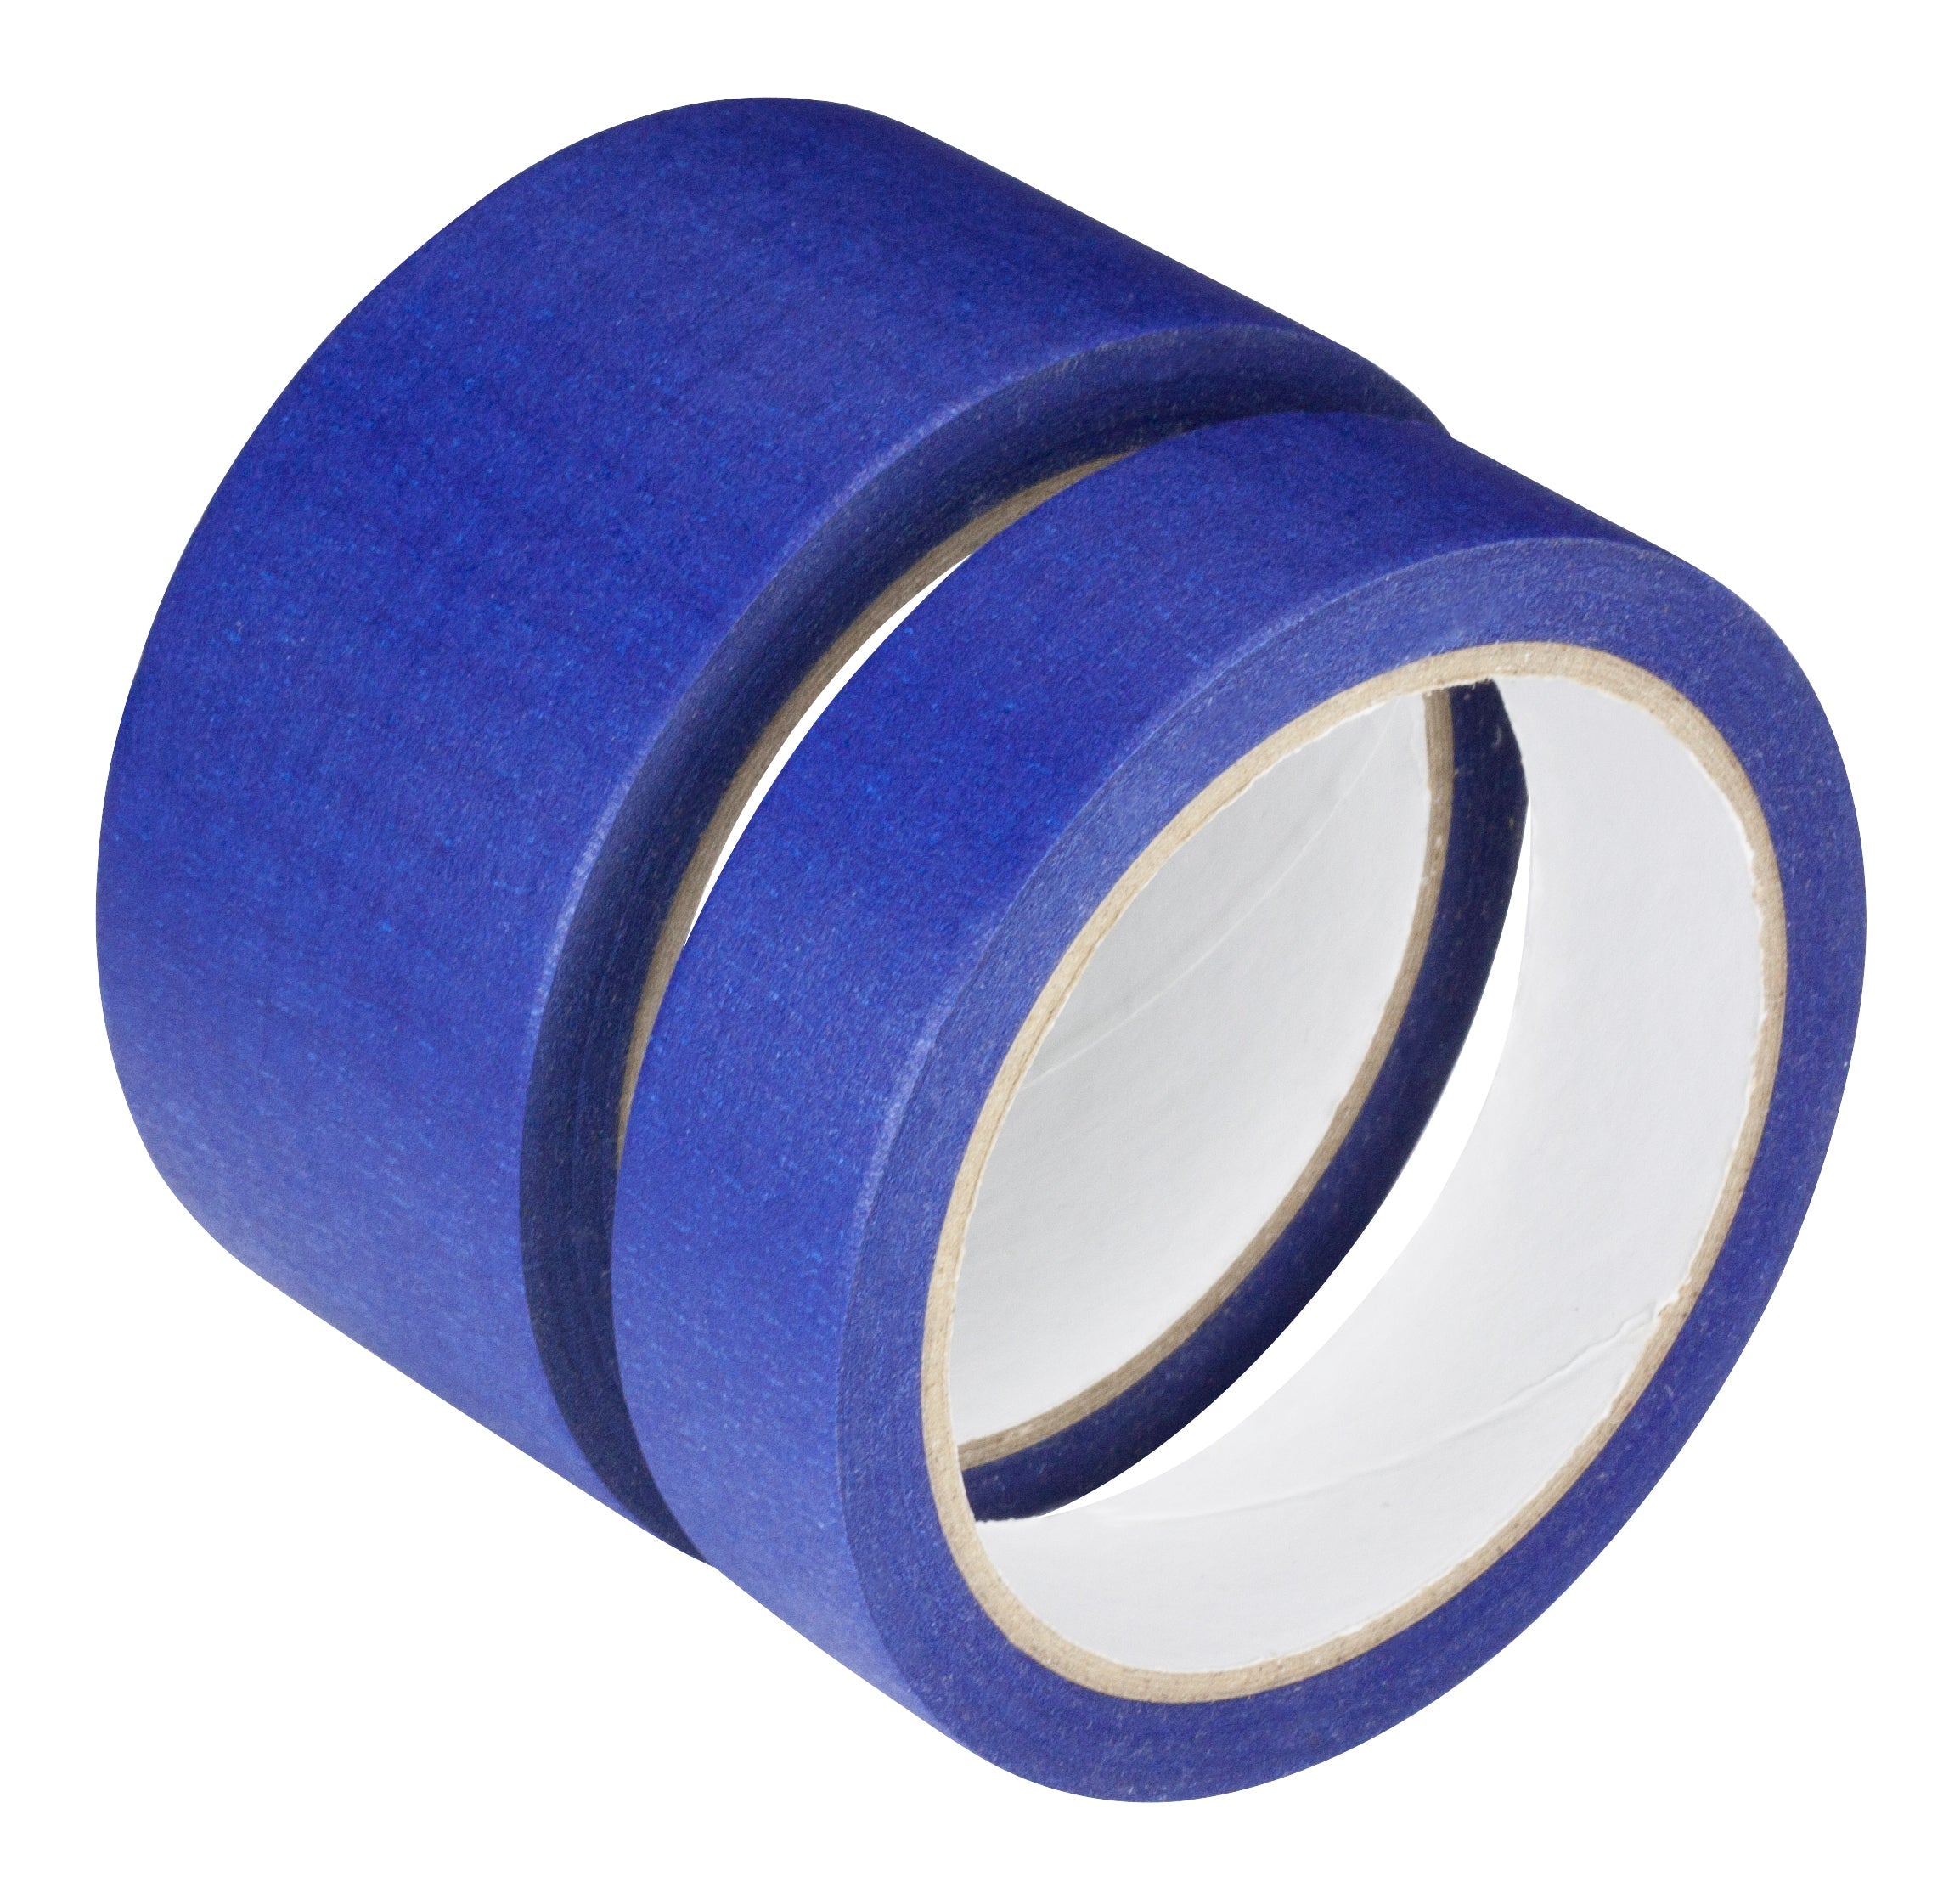 Masking Tape 50mm x 25m (Premium Quality) 0.12mm Thickness BLUE, UV Rated - Per Pack